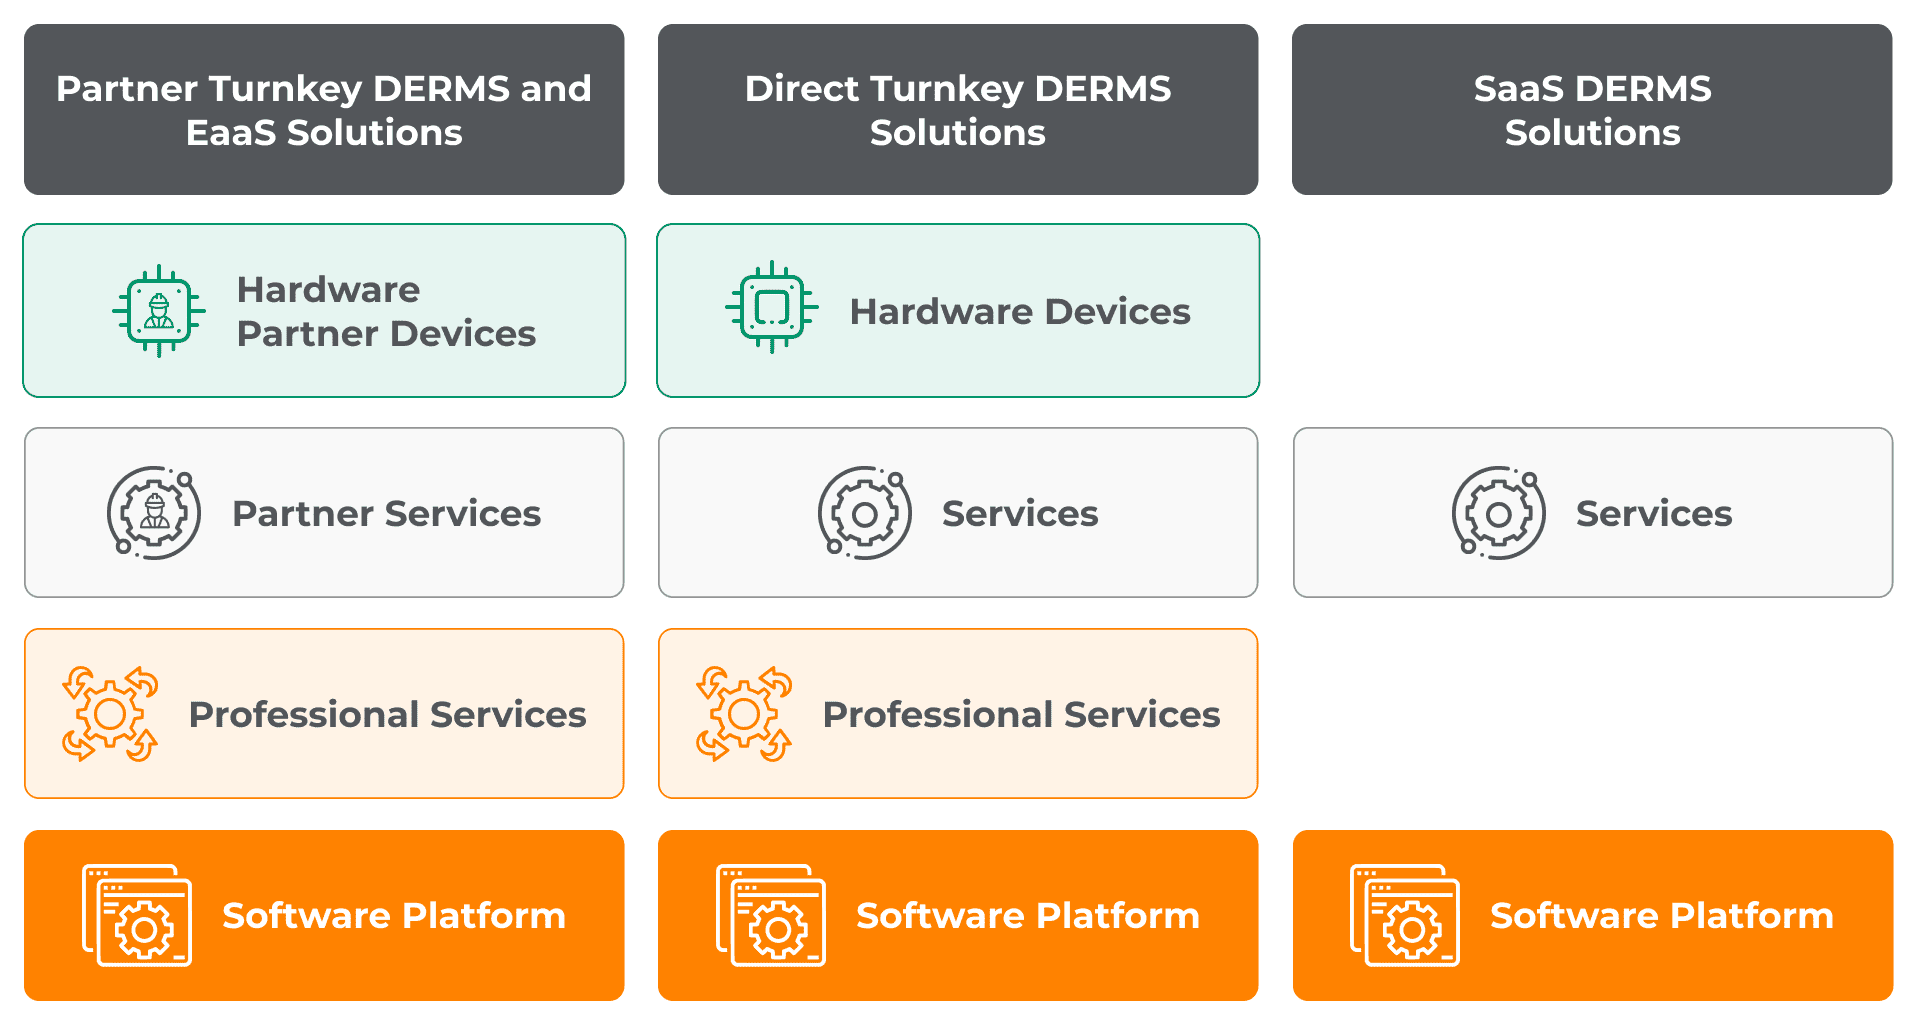 A diagram showing the differences between Turnkey EaaS solutions, direct turnkey DERMS, and Saas DERMS solutions. 